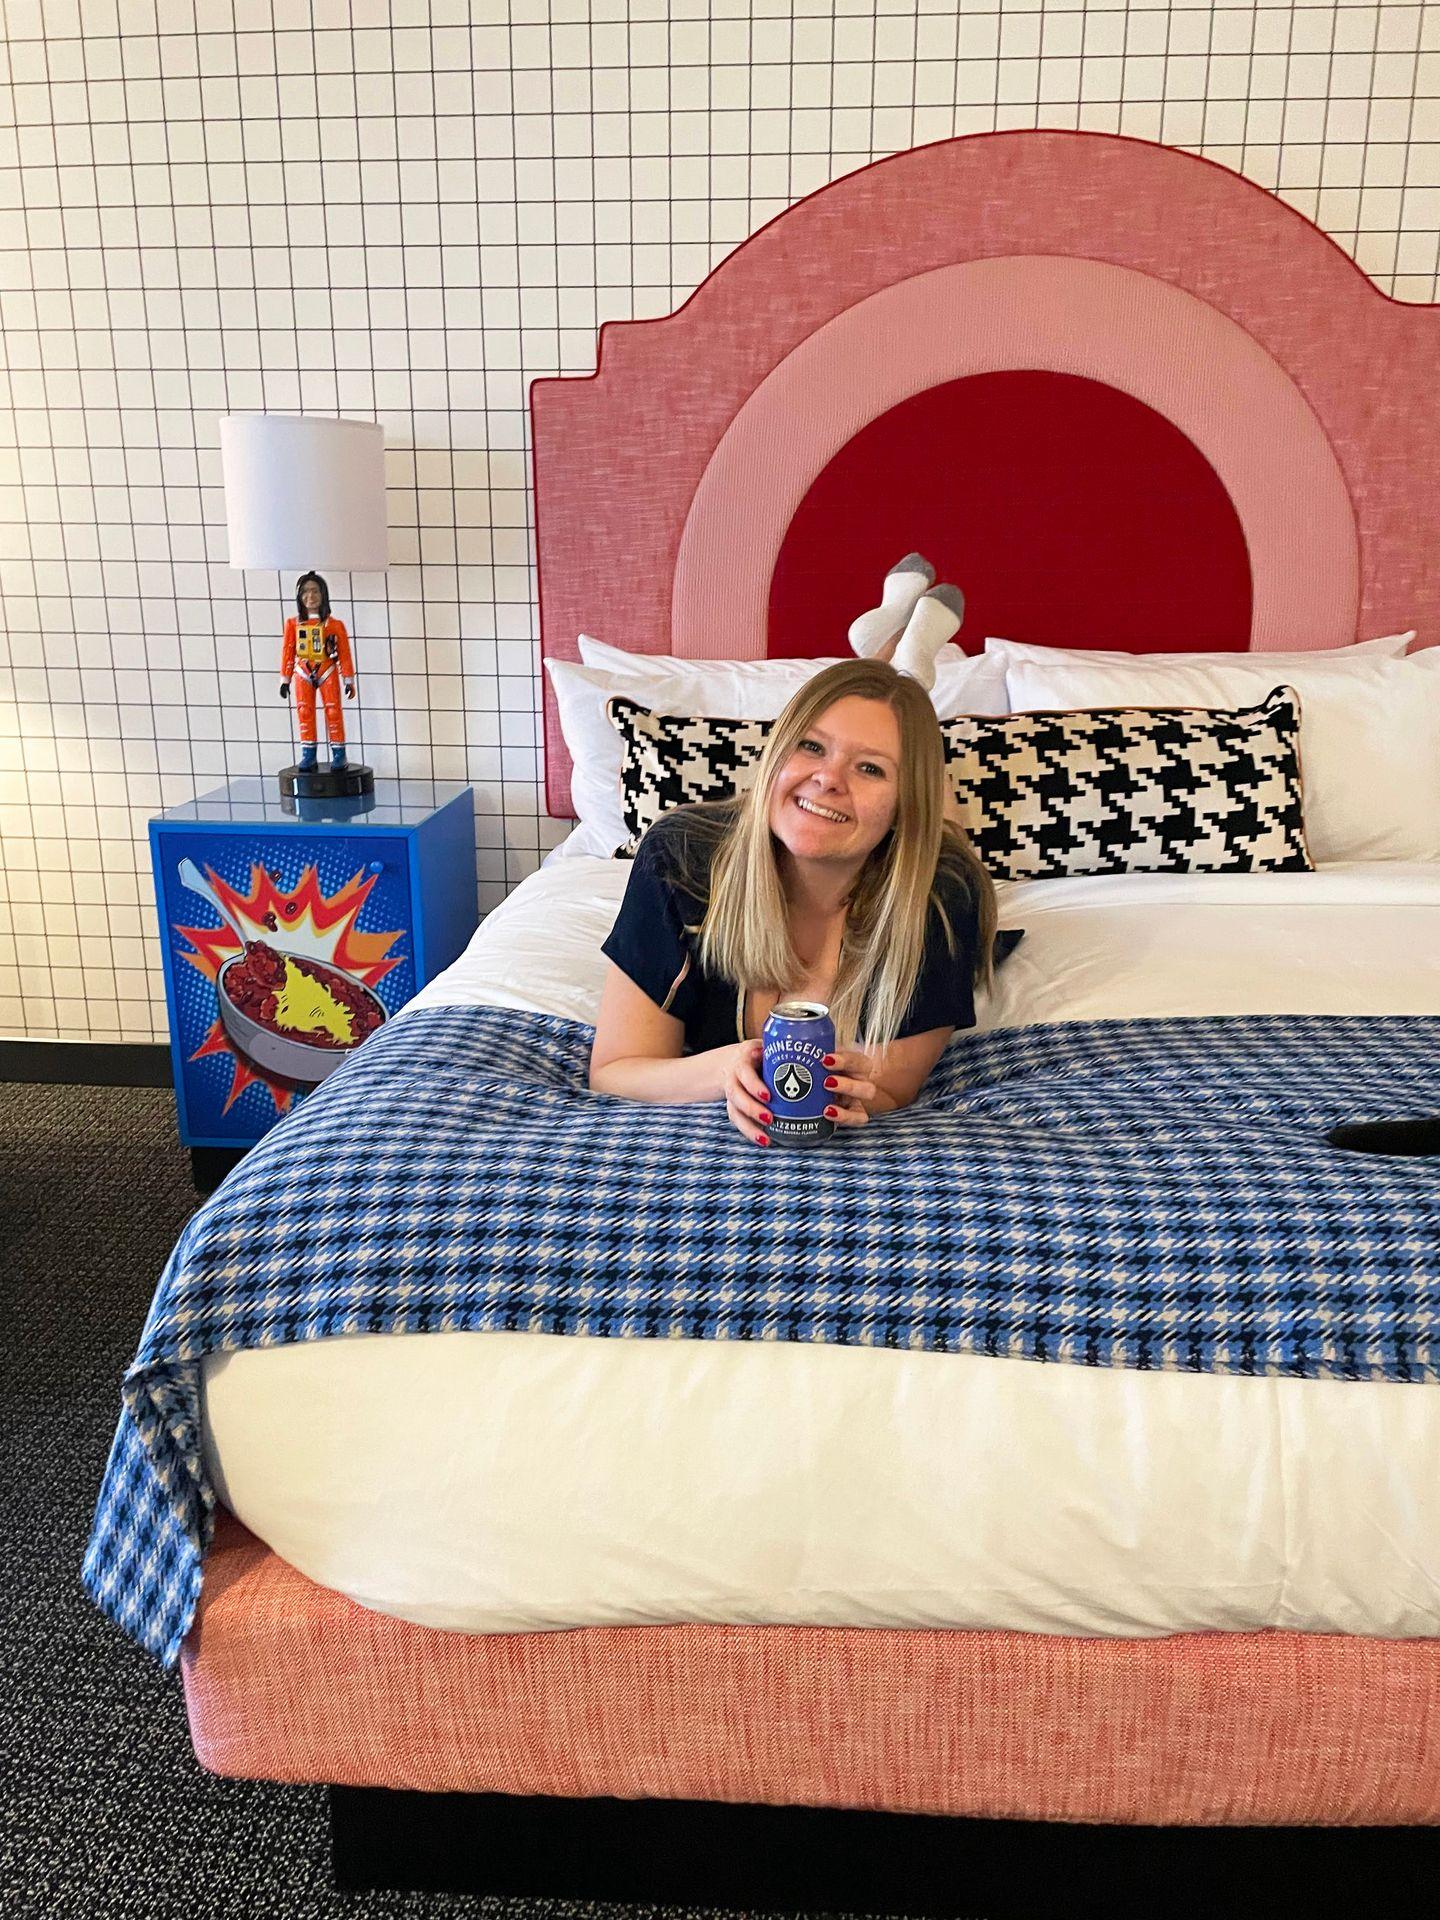 Lydia laying on her stomach in a room in the Graduate Cincinnati hotel. She holds a Rhinegeist beer. There is a blue plaid blanket laying across the bed and the headboard is rounded with pink and red stripes. The nightstand has a bowl of chili drawn in a comic book style.